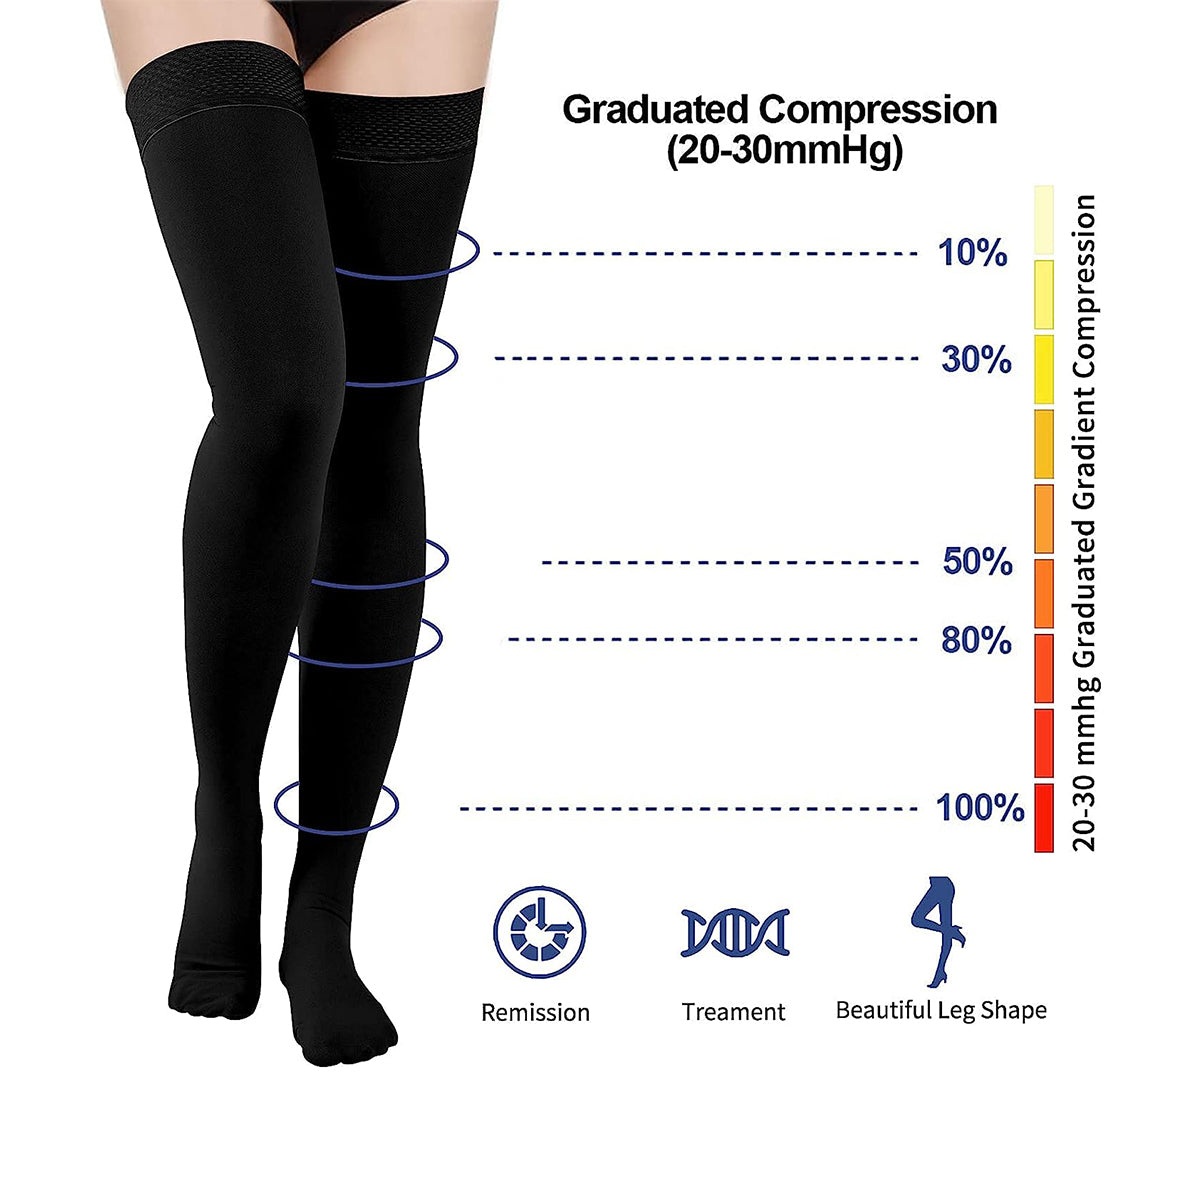 Medical Compression Stockings Uk - Support Stockings 20-30 mmHg